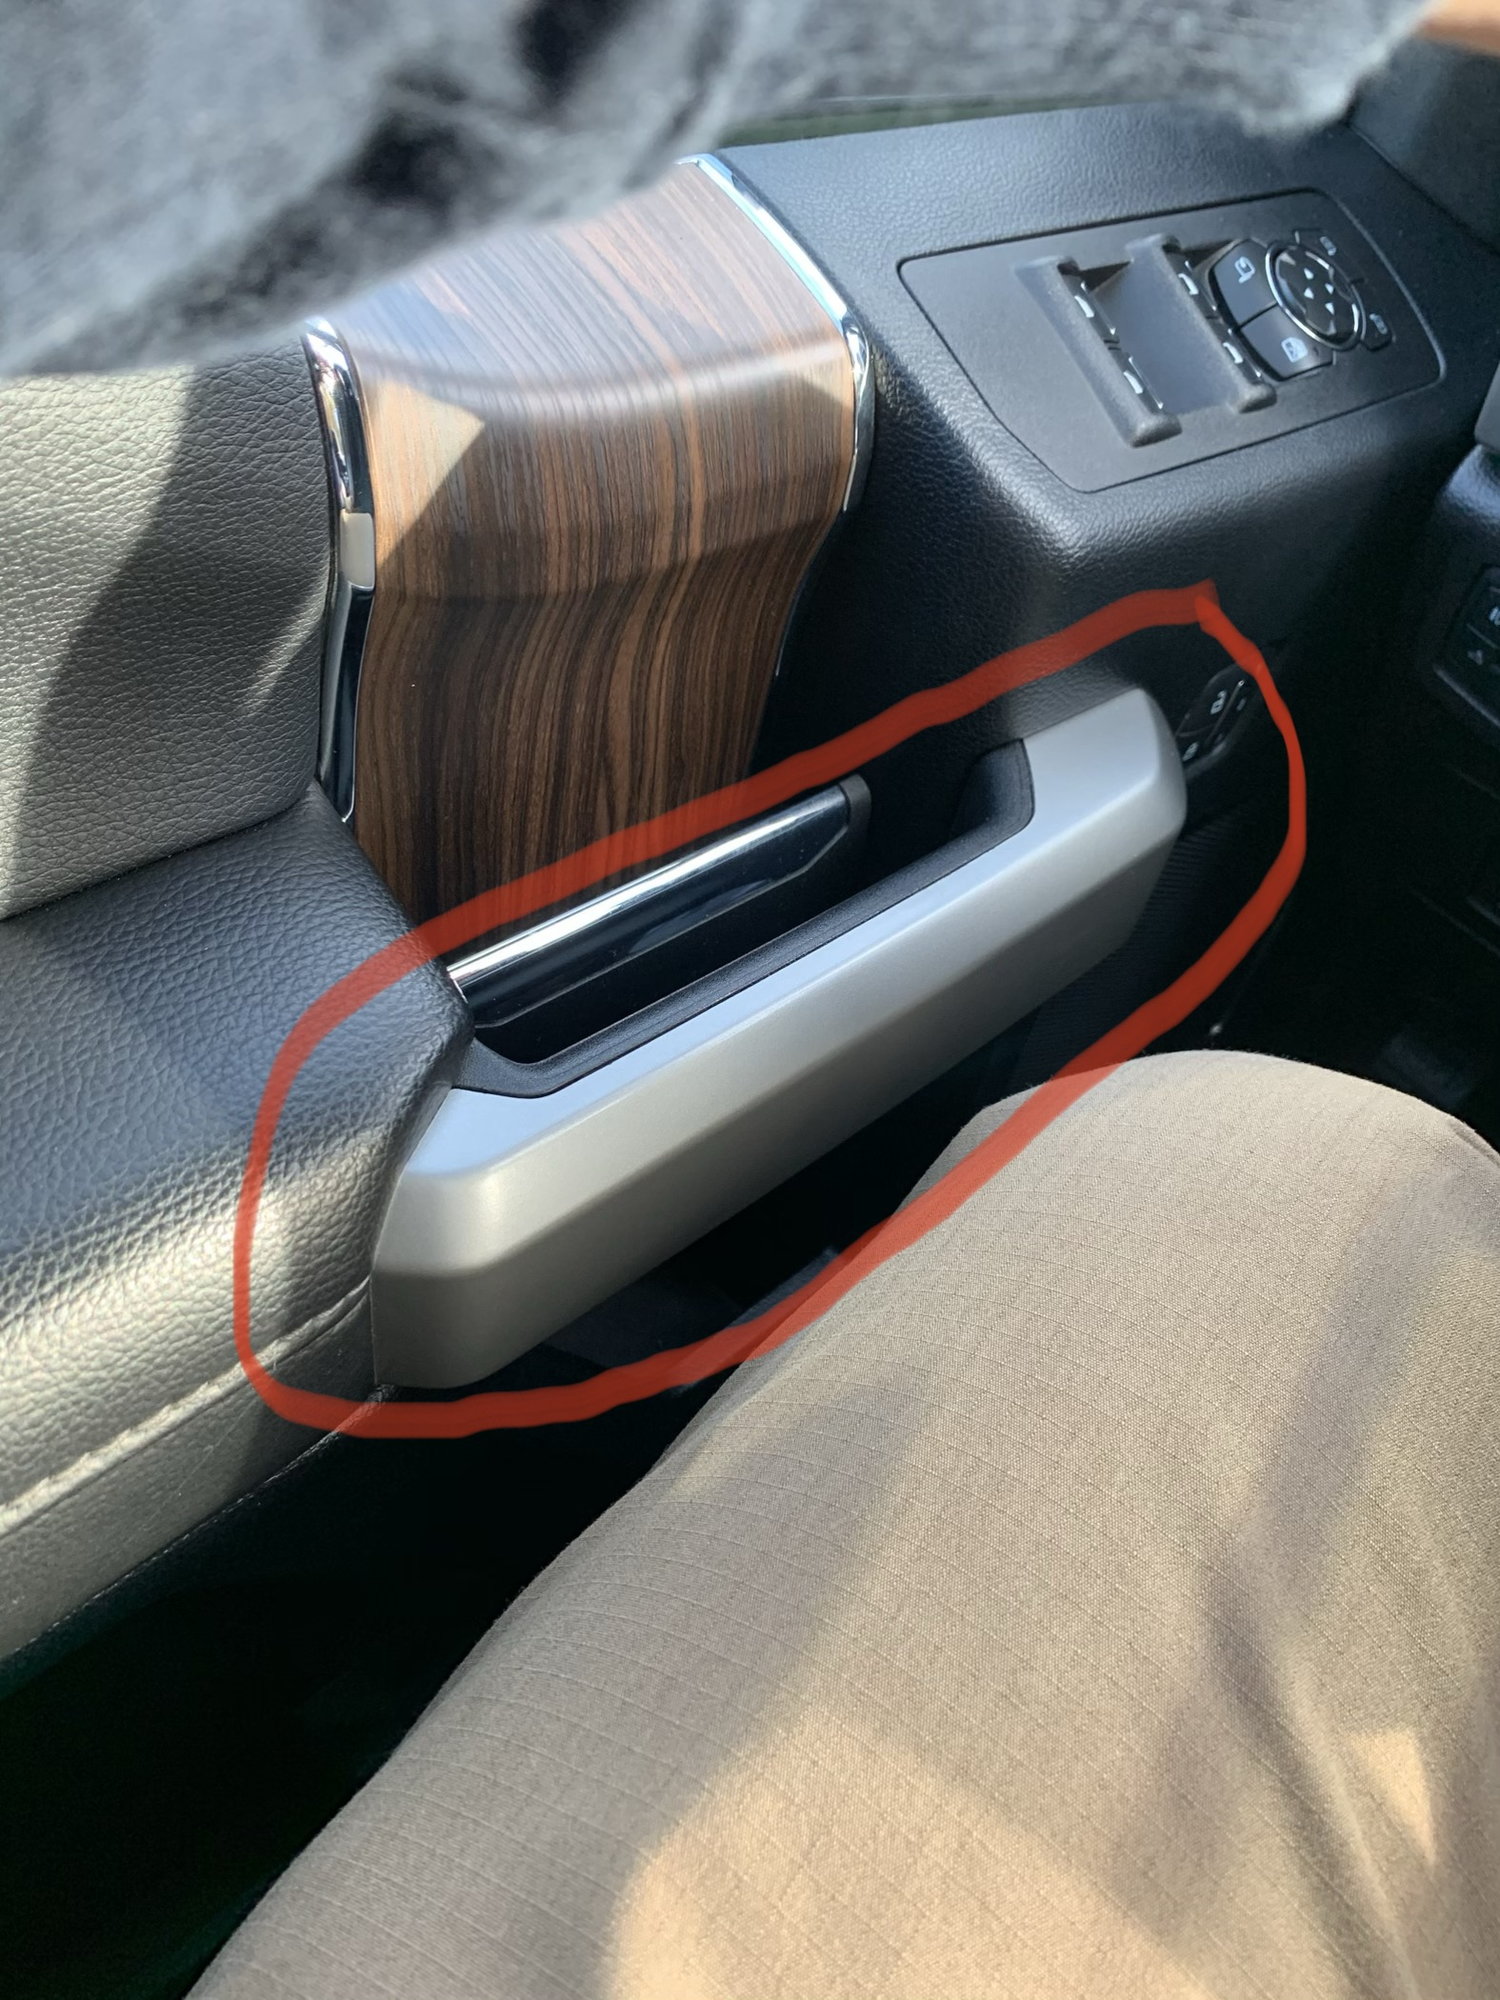 Interior Door Handle - Ford F150 Forum - Community of Ford Truck Fans